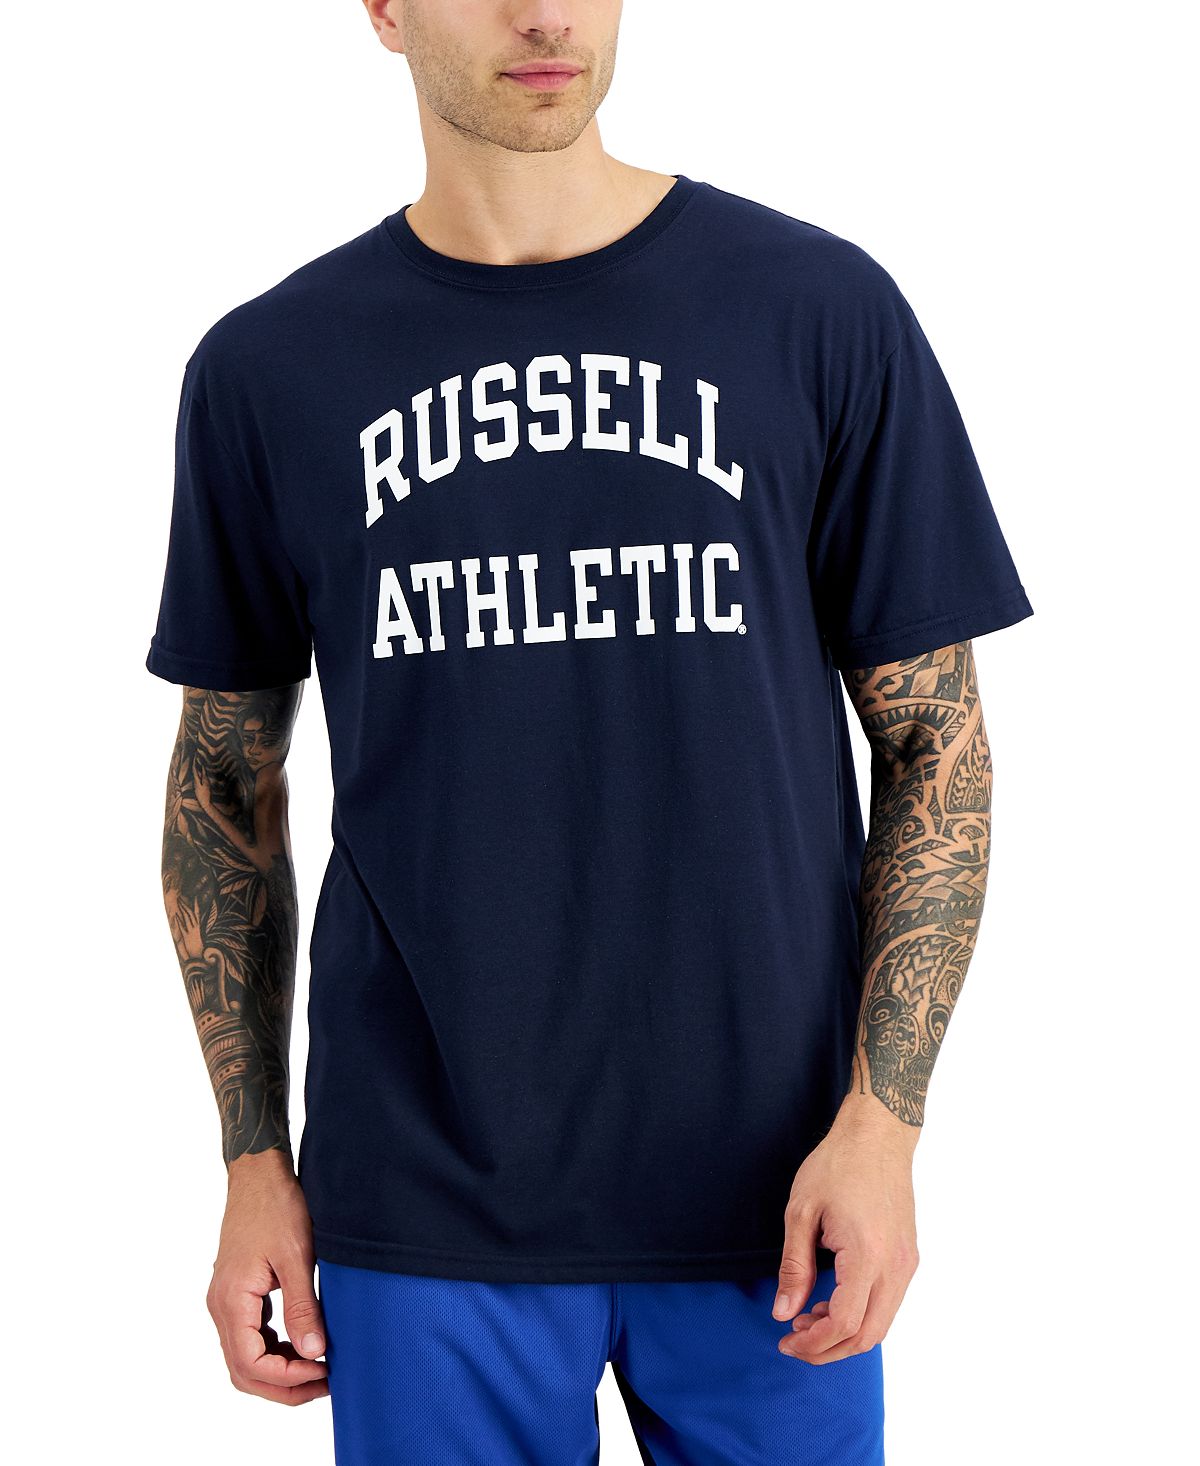 Russell Athletic Archie Logo Graphic T-shirt Dark Navy